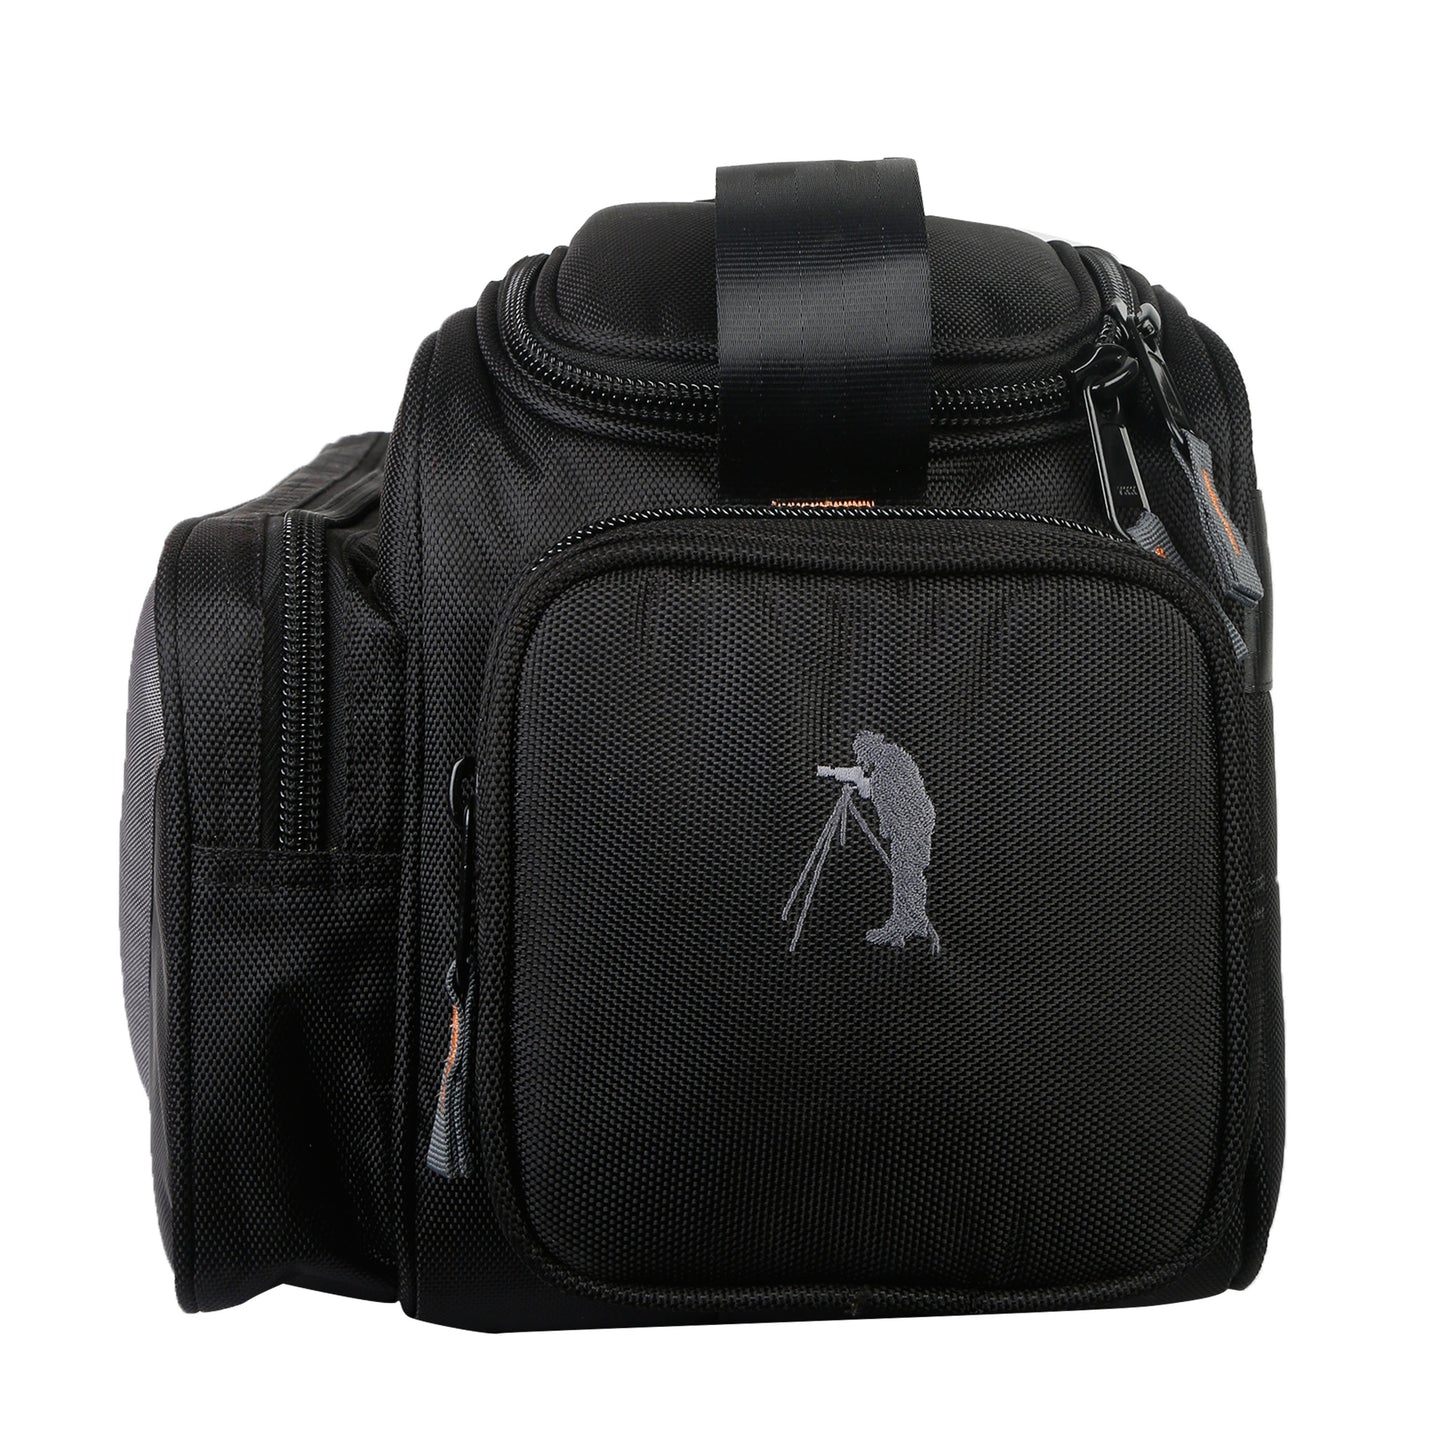 "Image: Side view of the P45 Videographer 16 video camera bag, highlighting its convenient side pocket for additional storage. The side pocket provides extra space for accessories, cables, or personal items, keeping them easily accessible during video shoots. Stay organized and have everything you need at your fingertips with the P45 Videographer 16.